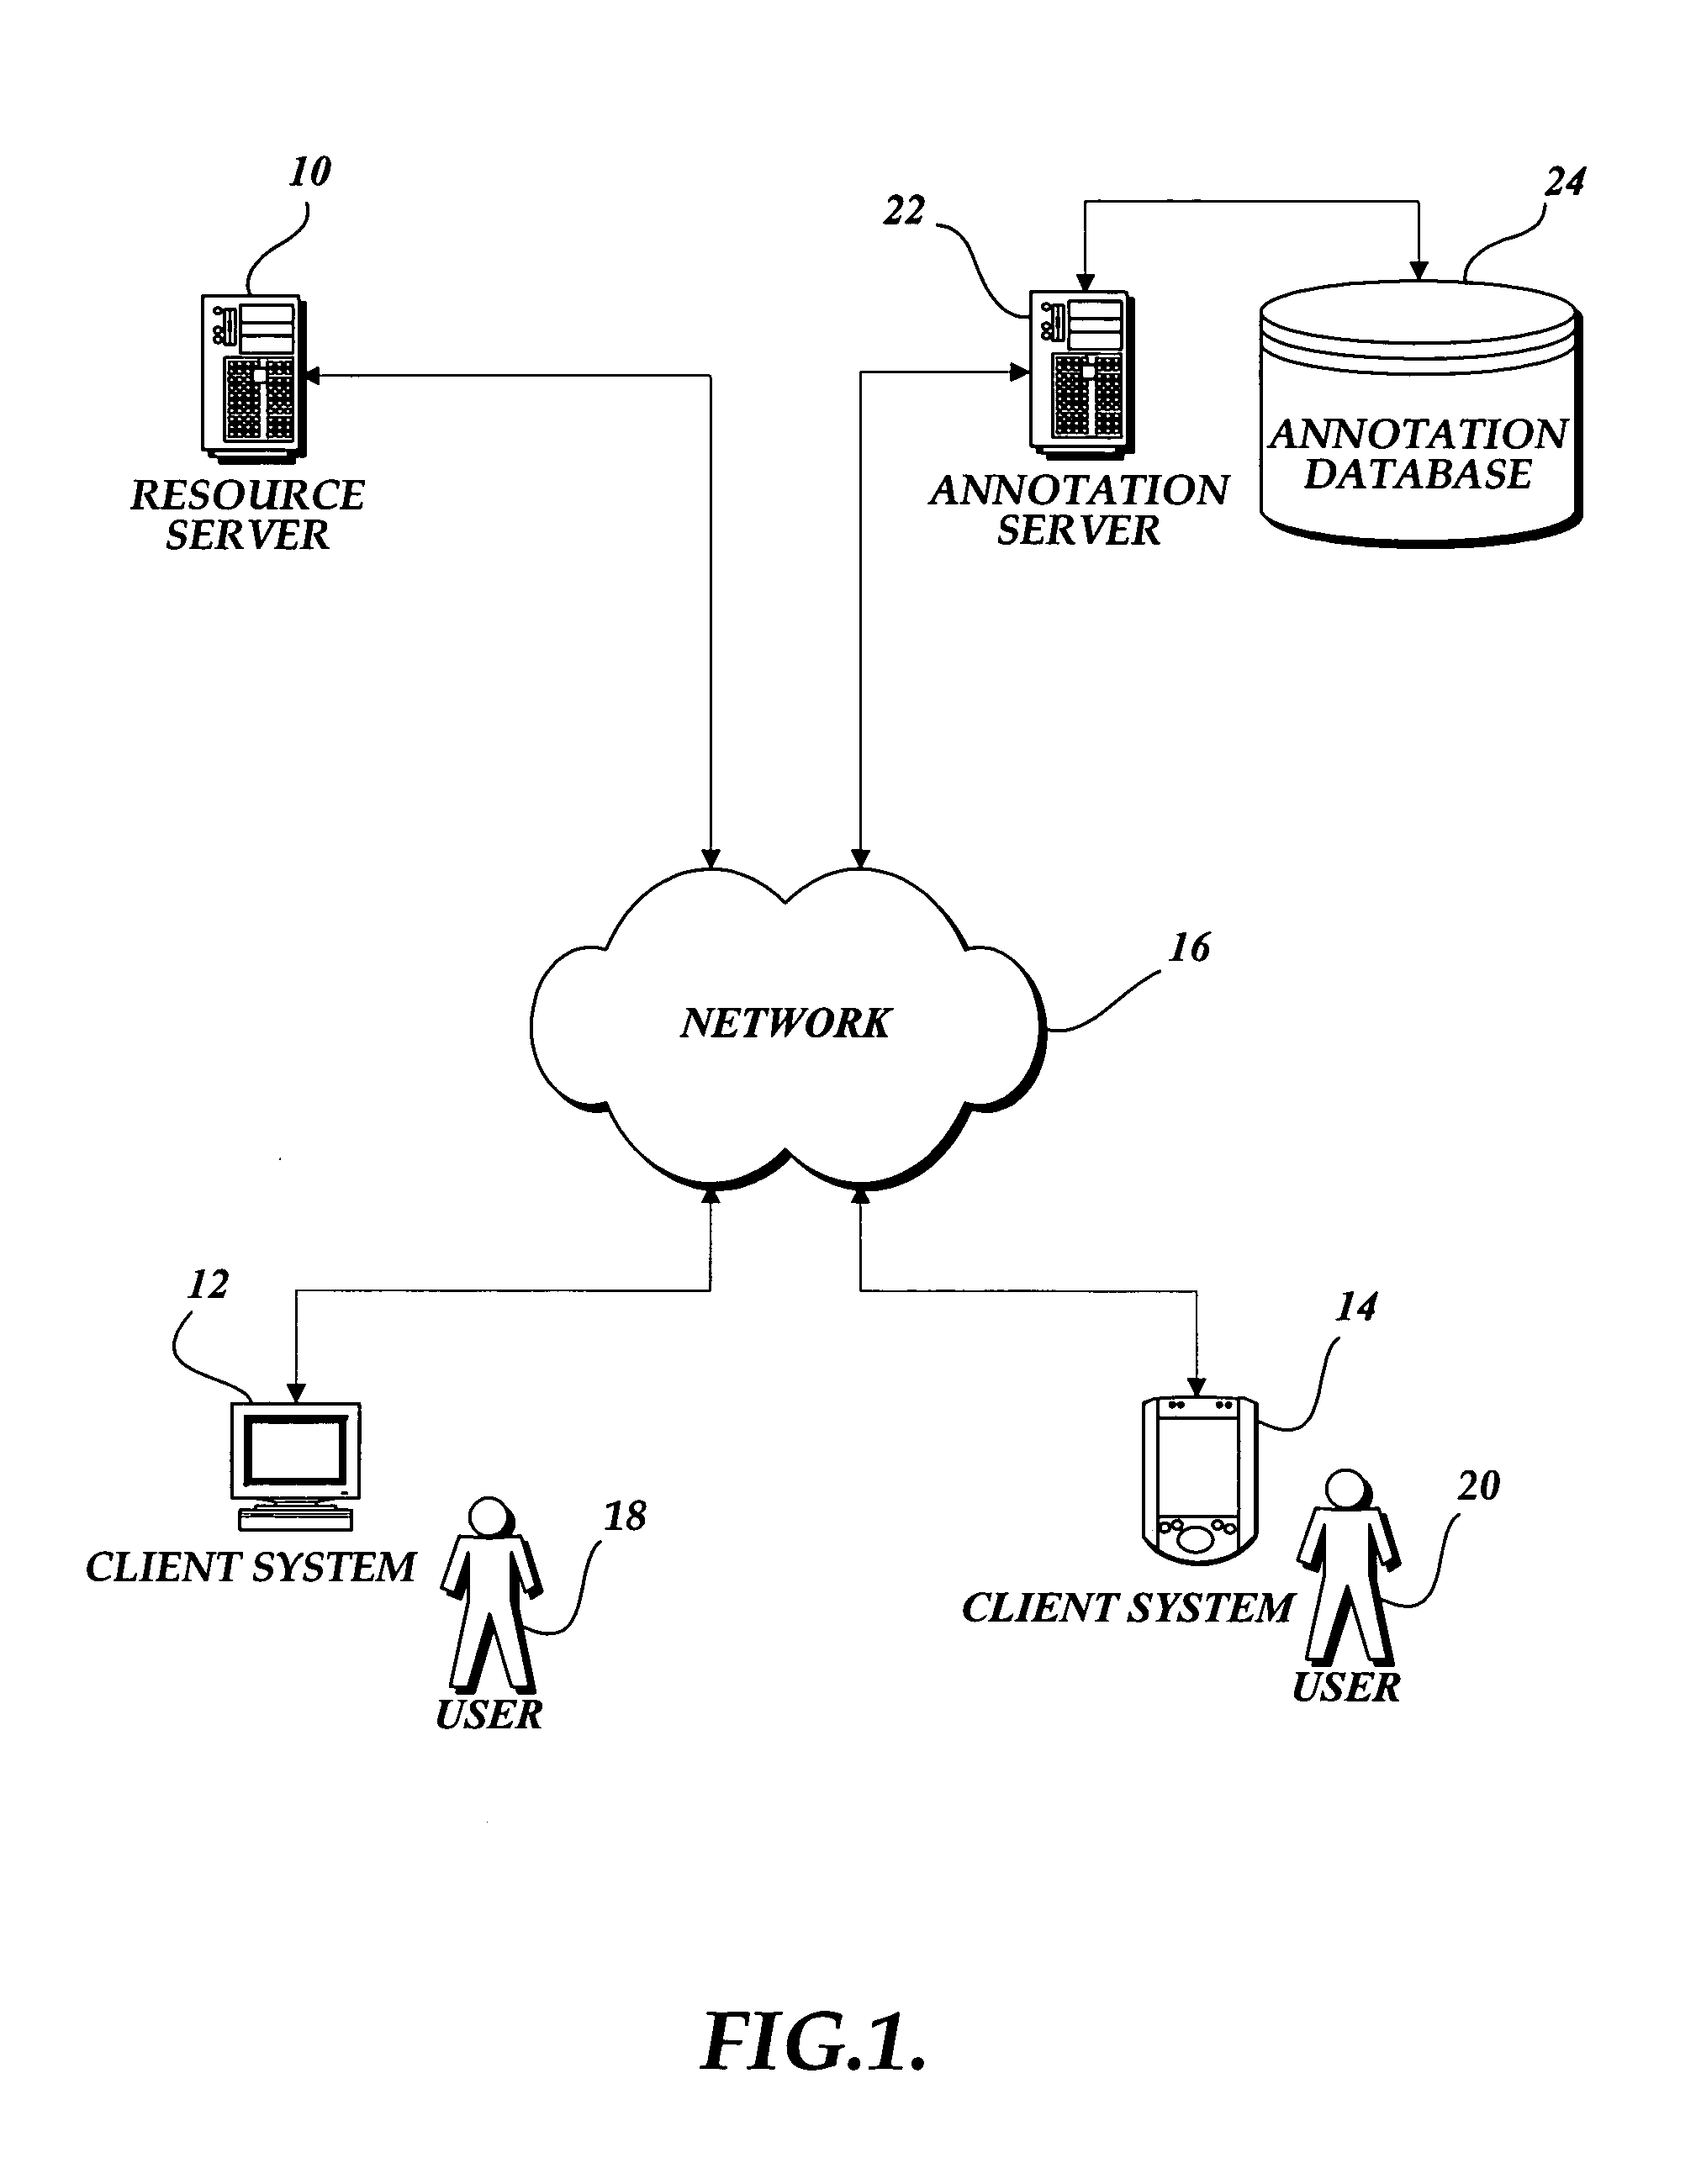 Automated annotation of a resource on a computer network using a network address of the resource